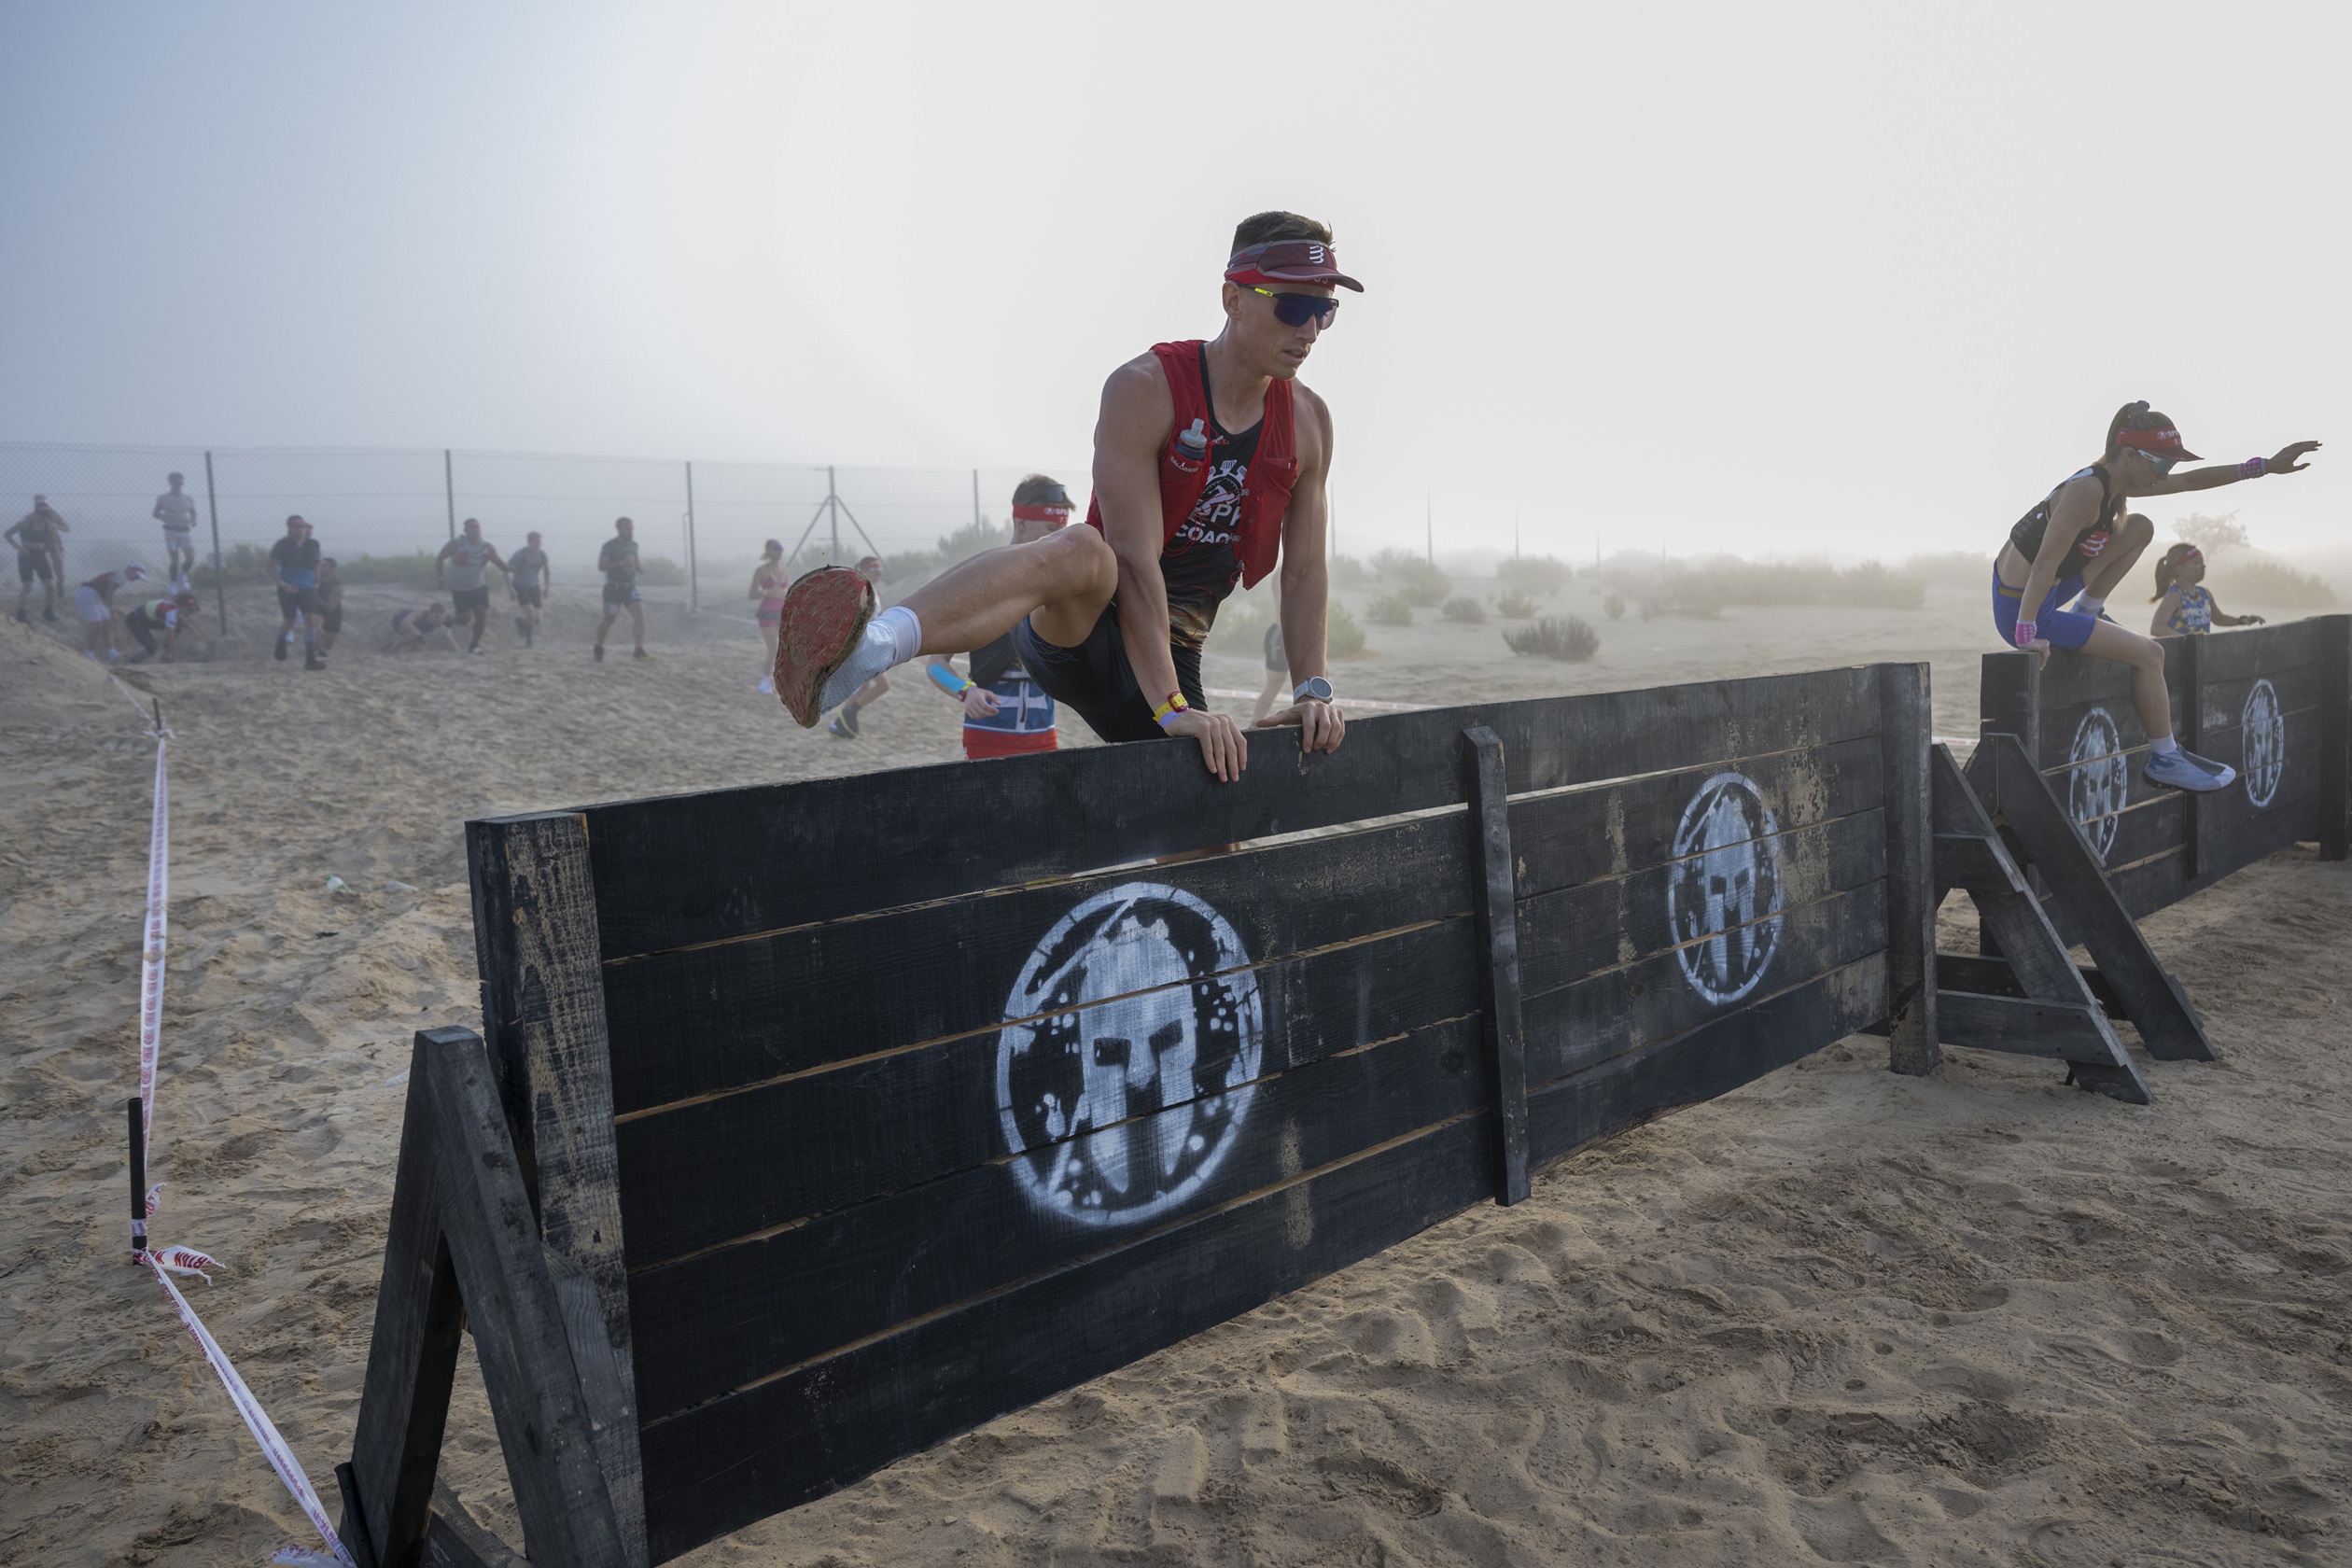 SPARTAN WORLD CHAMPIONSHIP KICKS OFF WITH INAUGURAL RACES AND A LOCAL WINNER